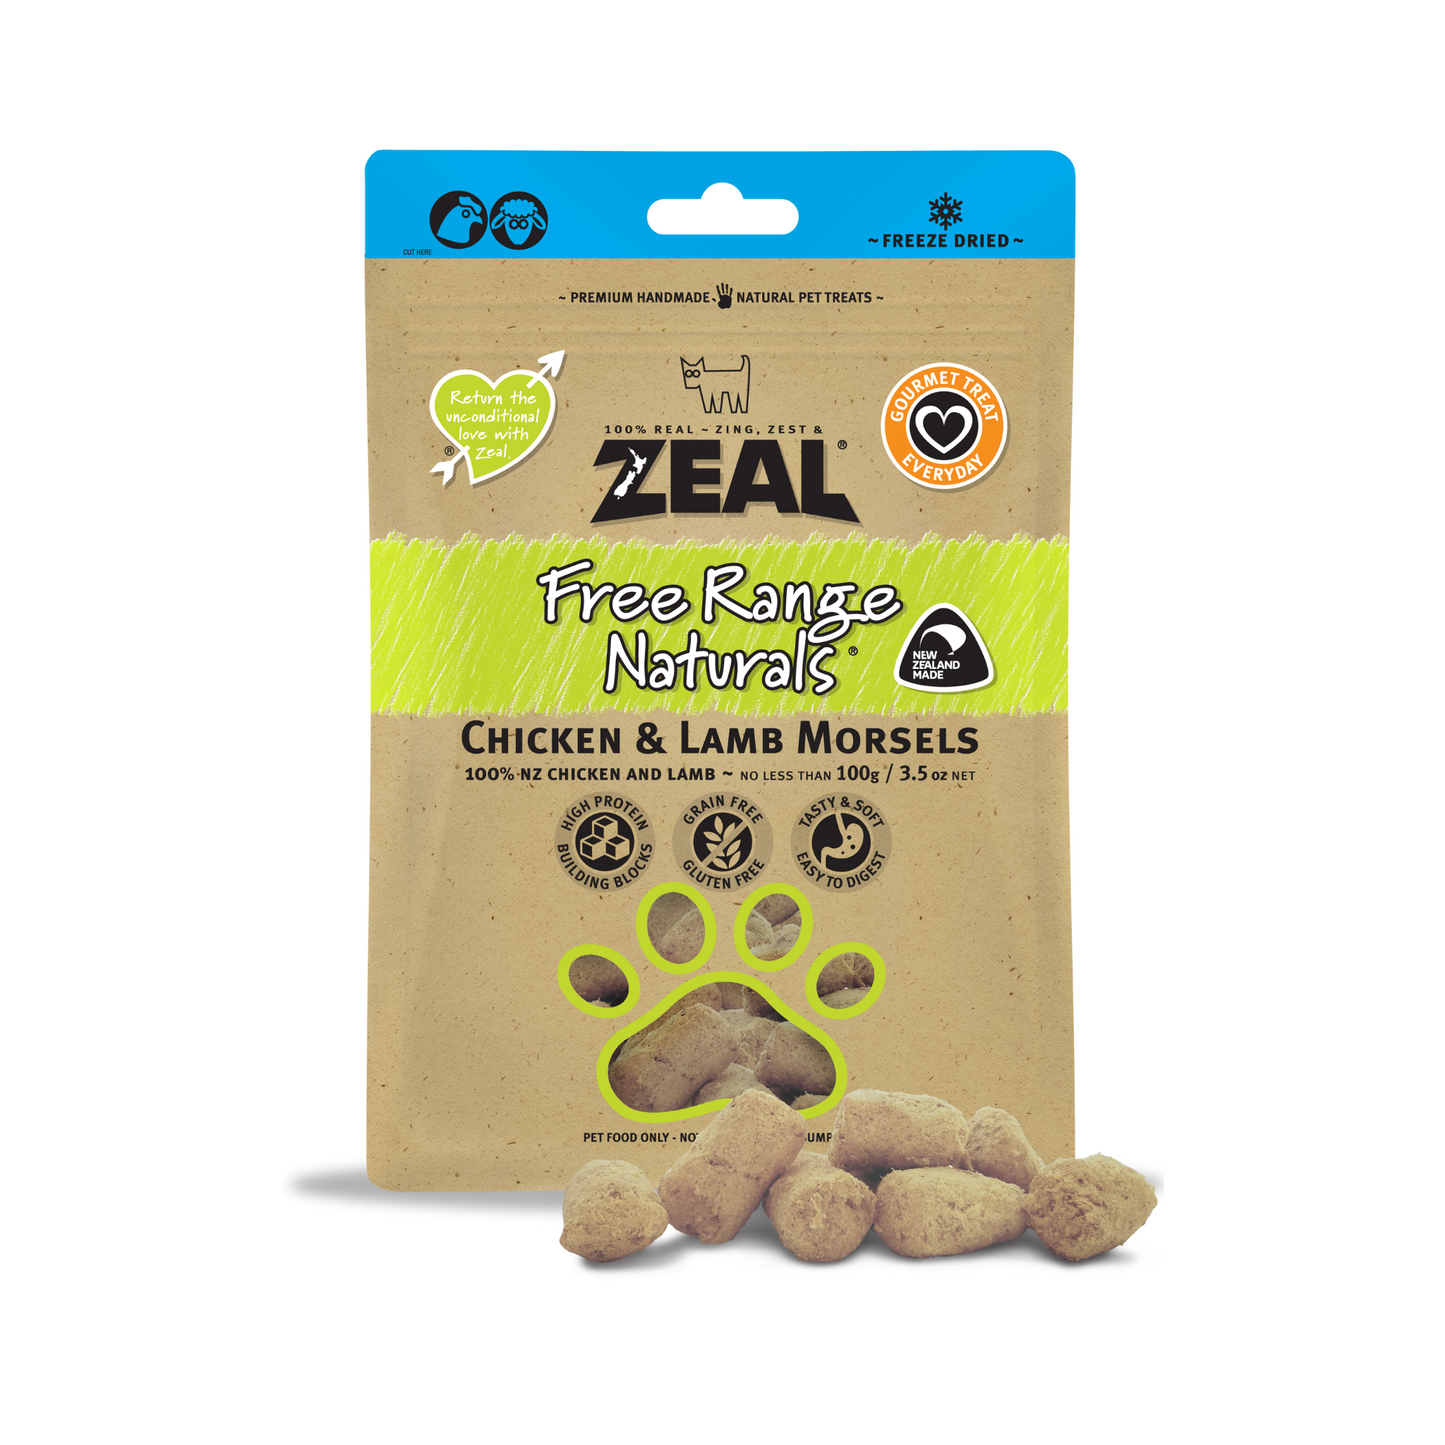 ZEAL Freeze Dried Chicken & Lamb Morsels Dog Treat 100g